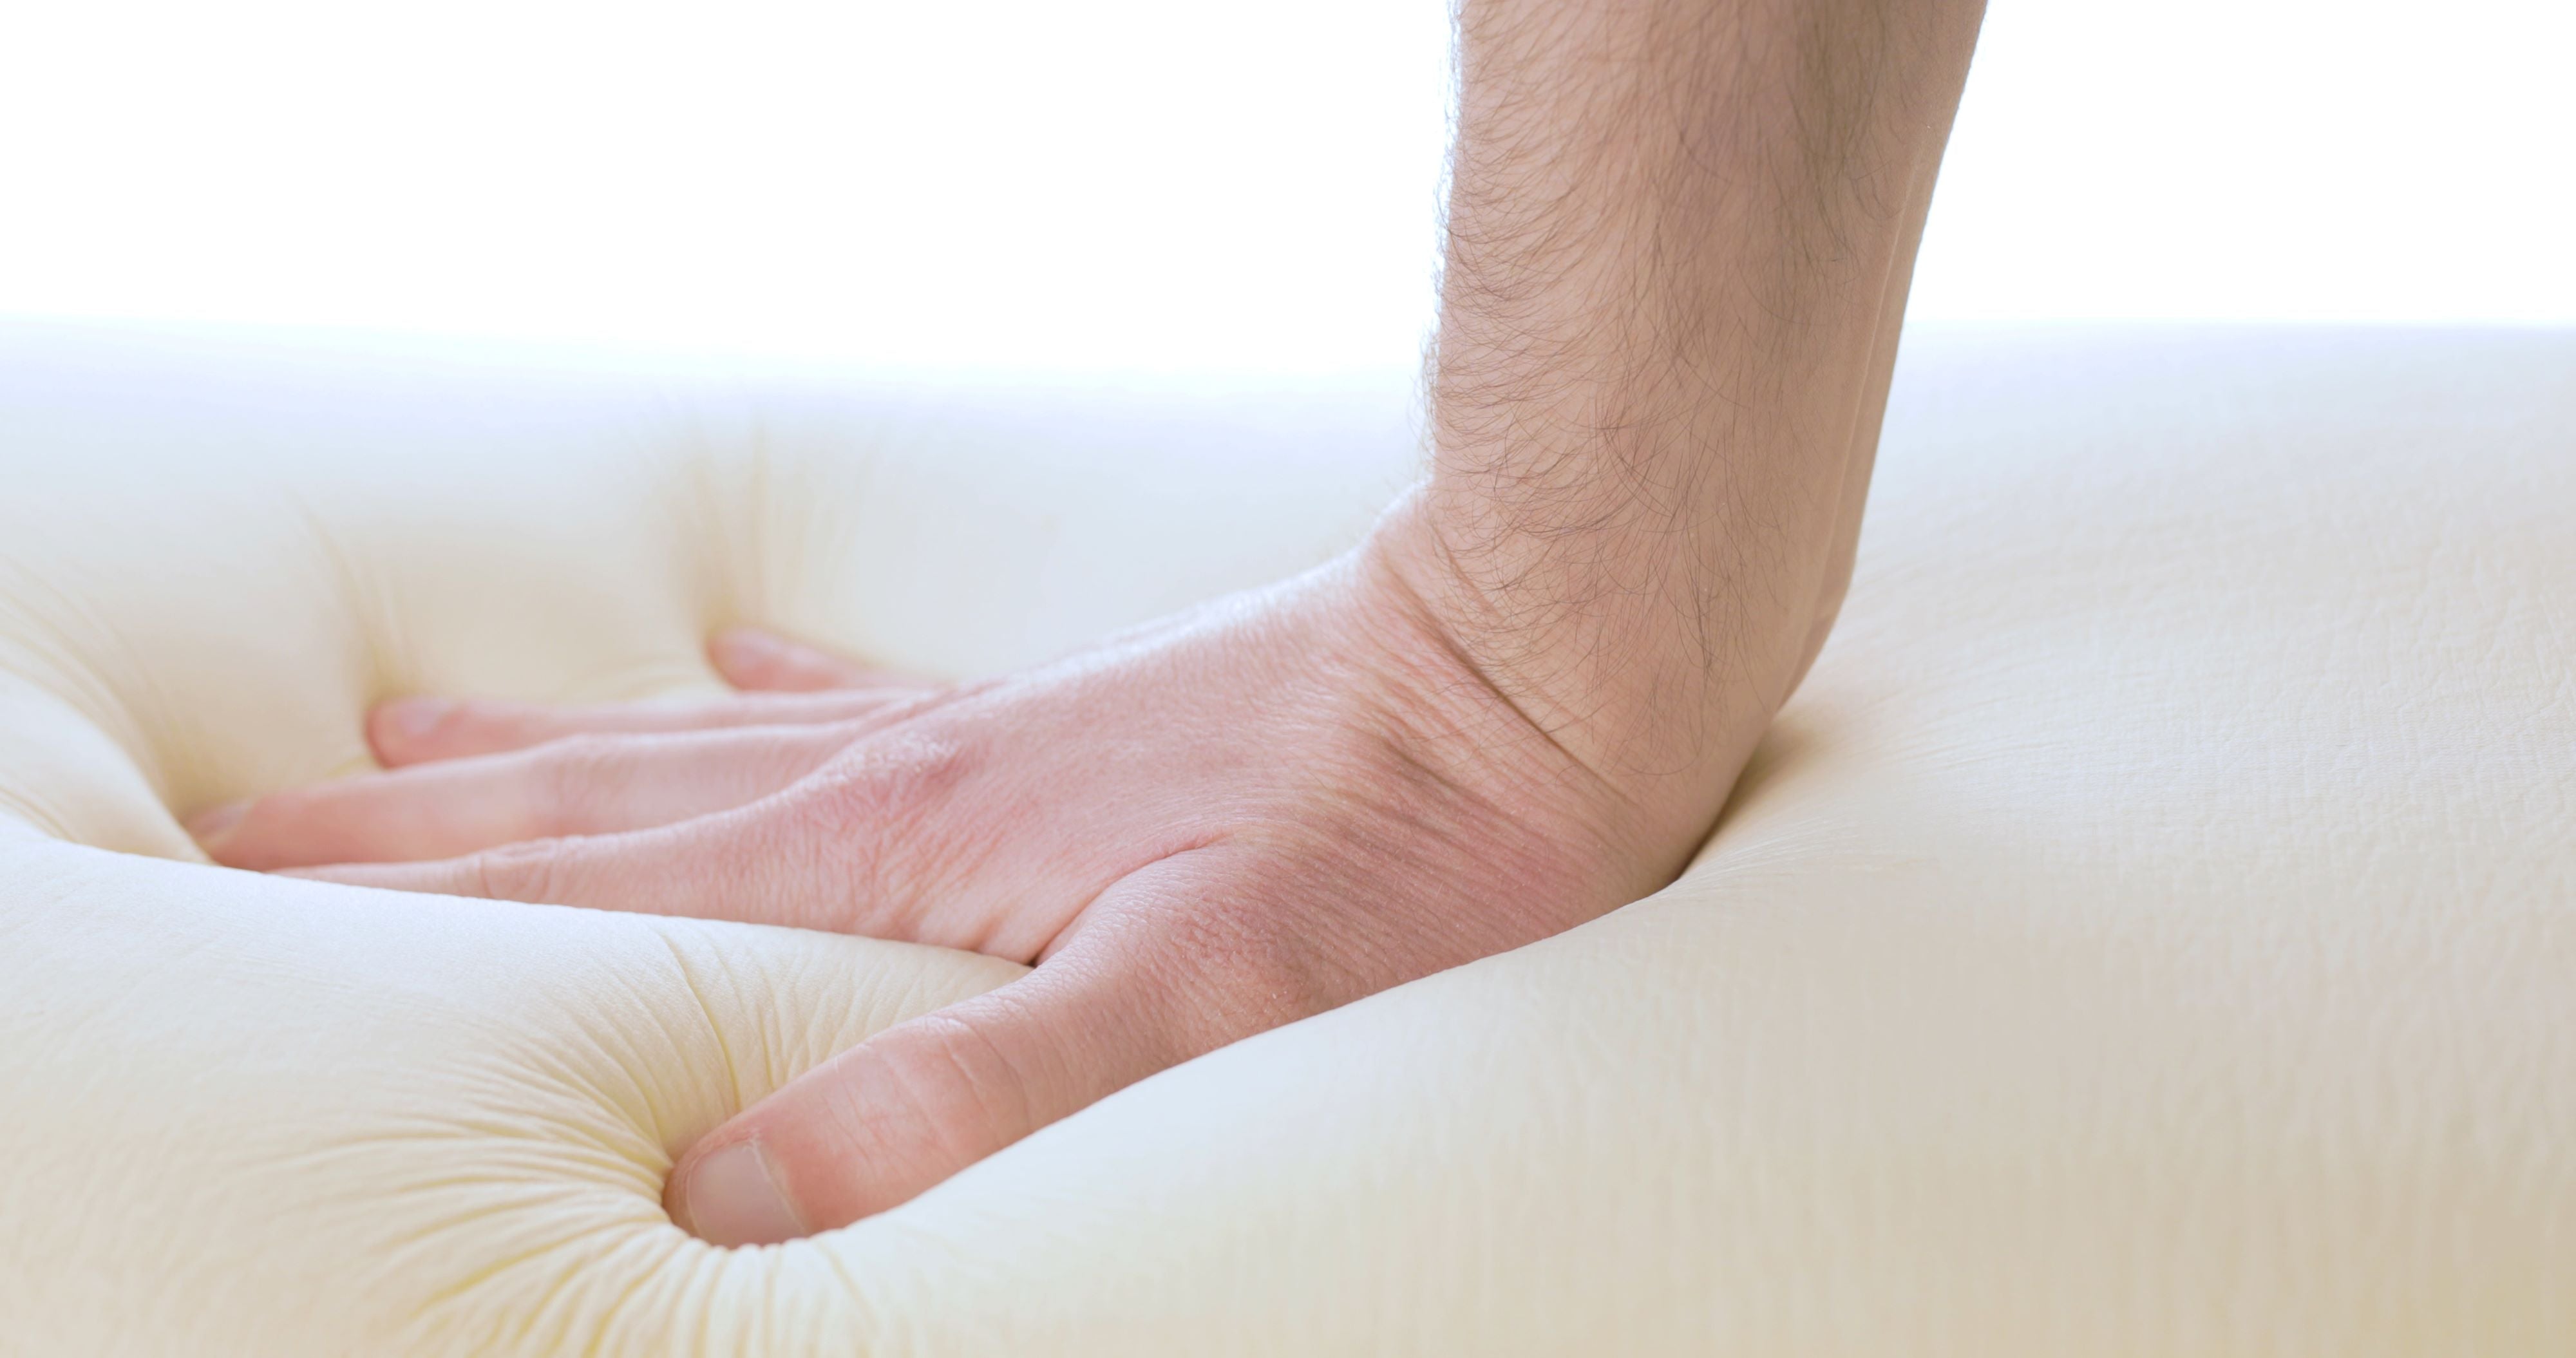 Someone is trying out a memory foam mattress by putting his palm into the soft material.